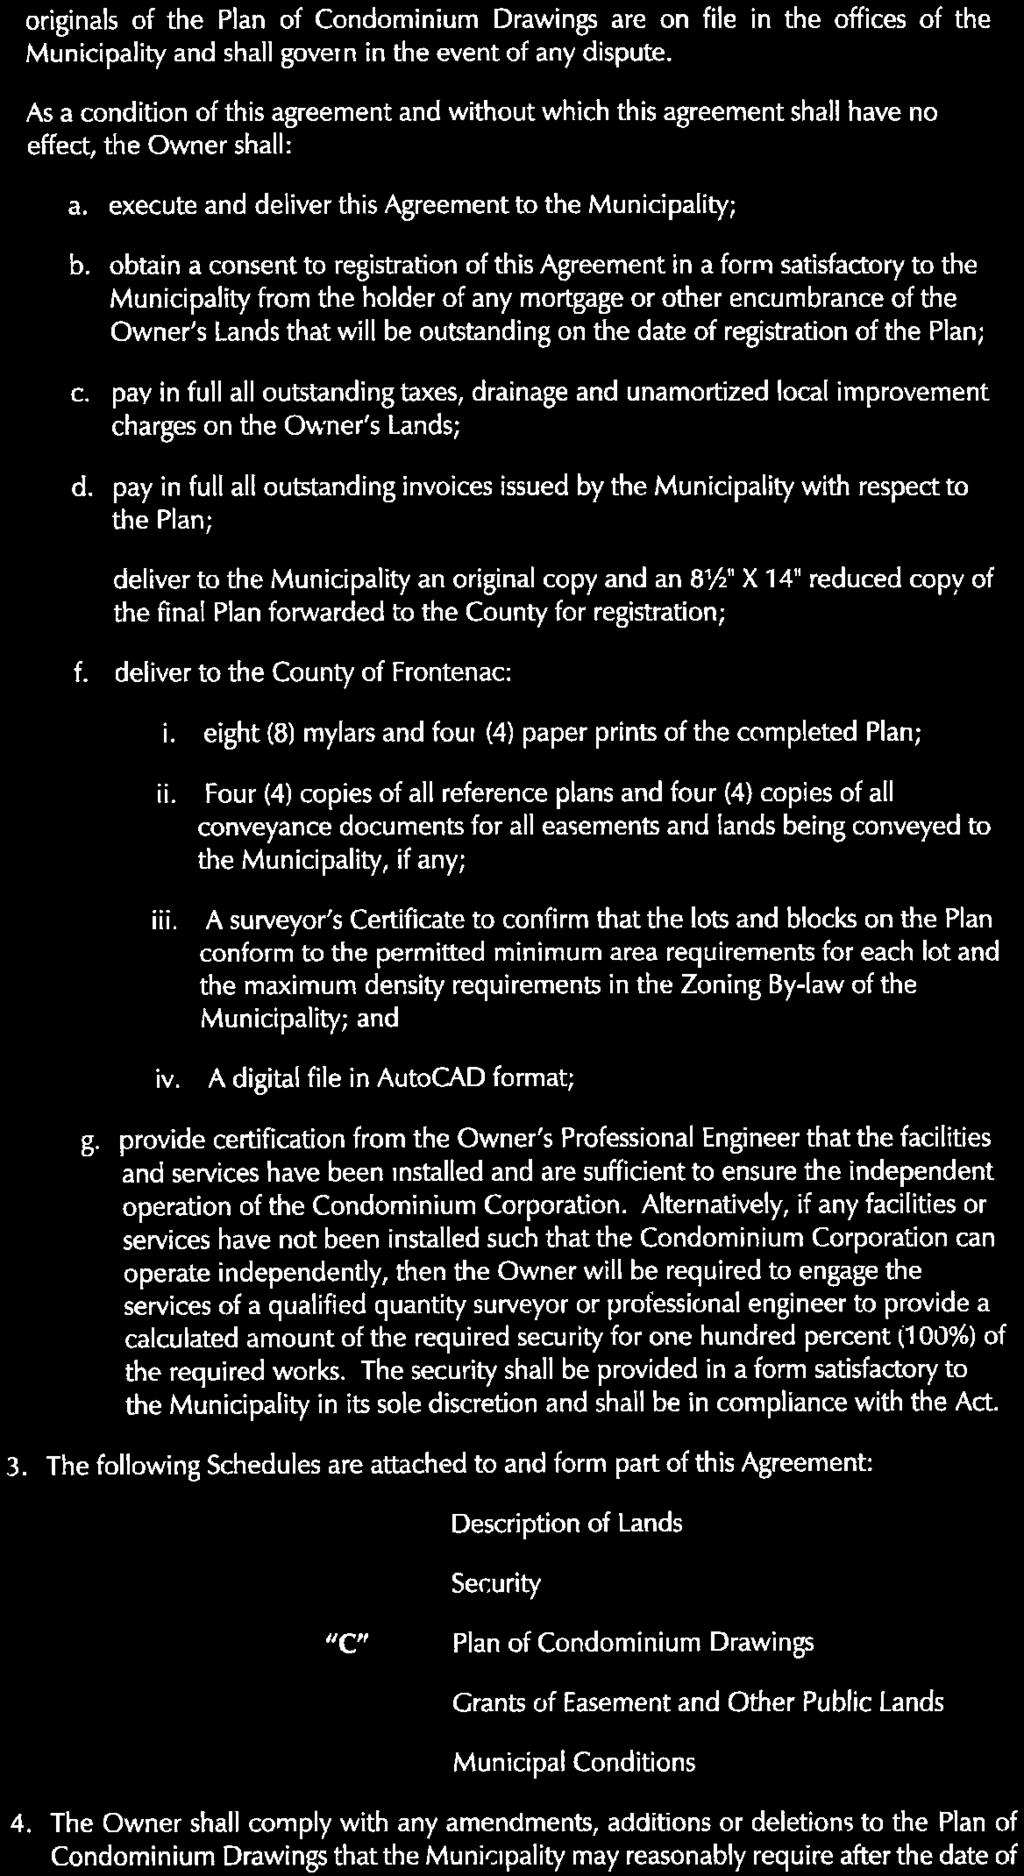 obtain a consent to registration of this Agreement in a form satisfactory to the Municipality from the holder of any mortgage or other encumbrance of the Owner's Lands that will be outstanding on the